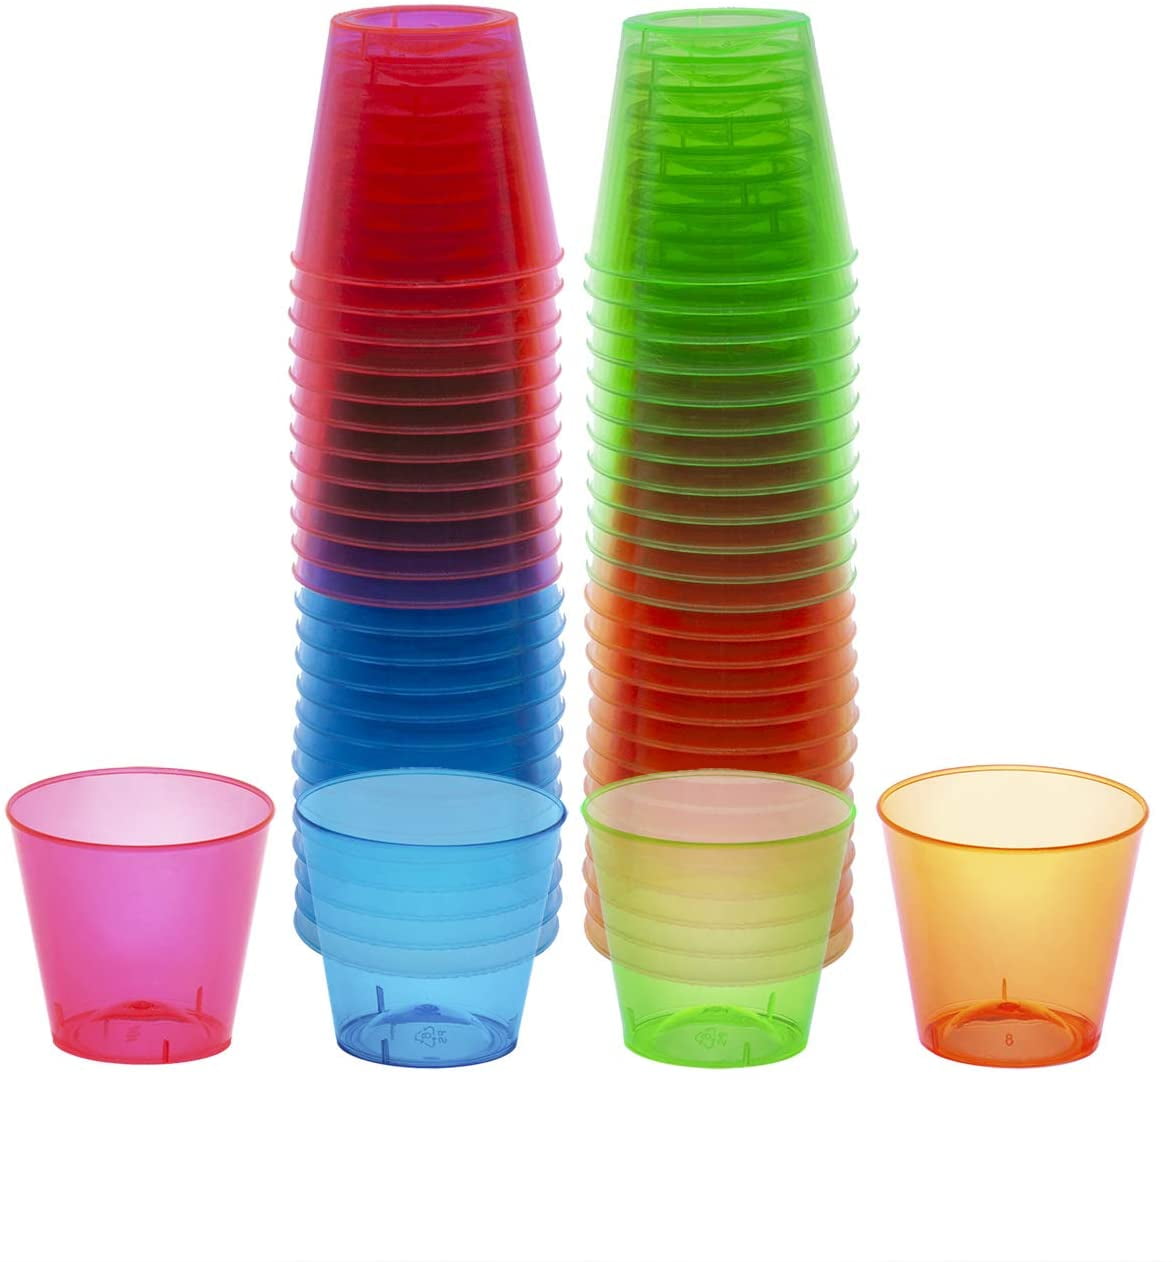 Assorted Neon 80-Count Party Essentials Hard Plastic 2-Ounce Shot/Shooter Glasses 